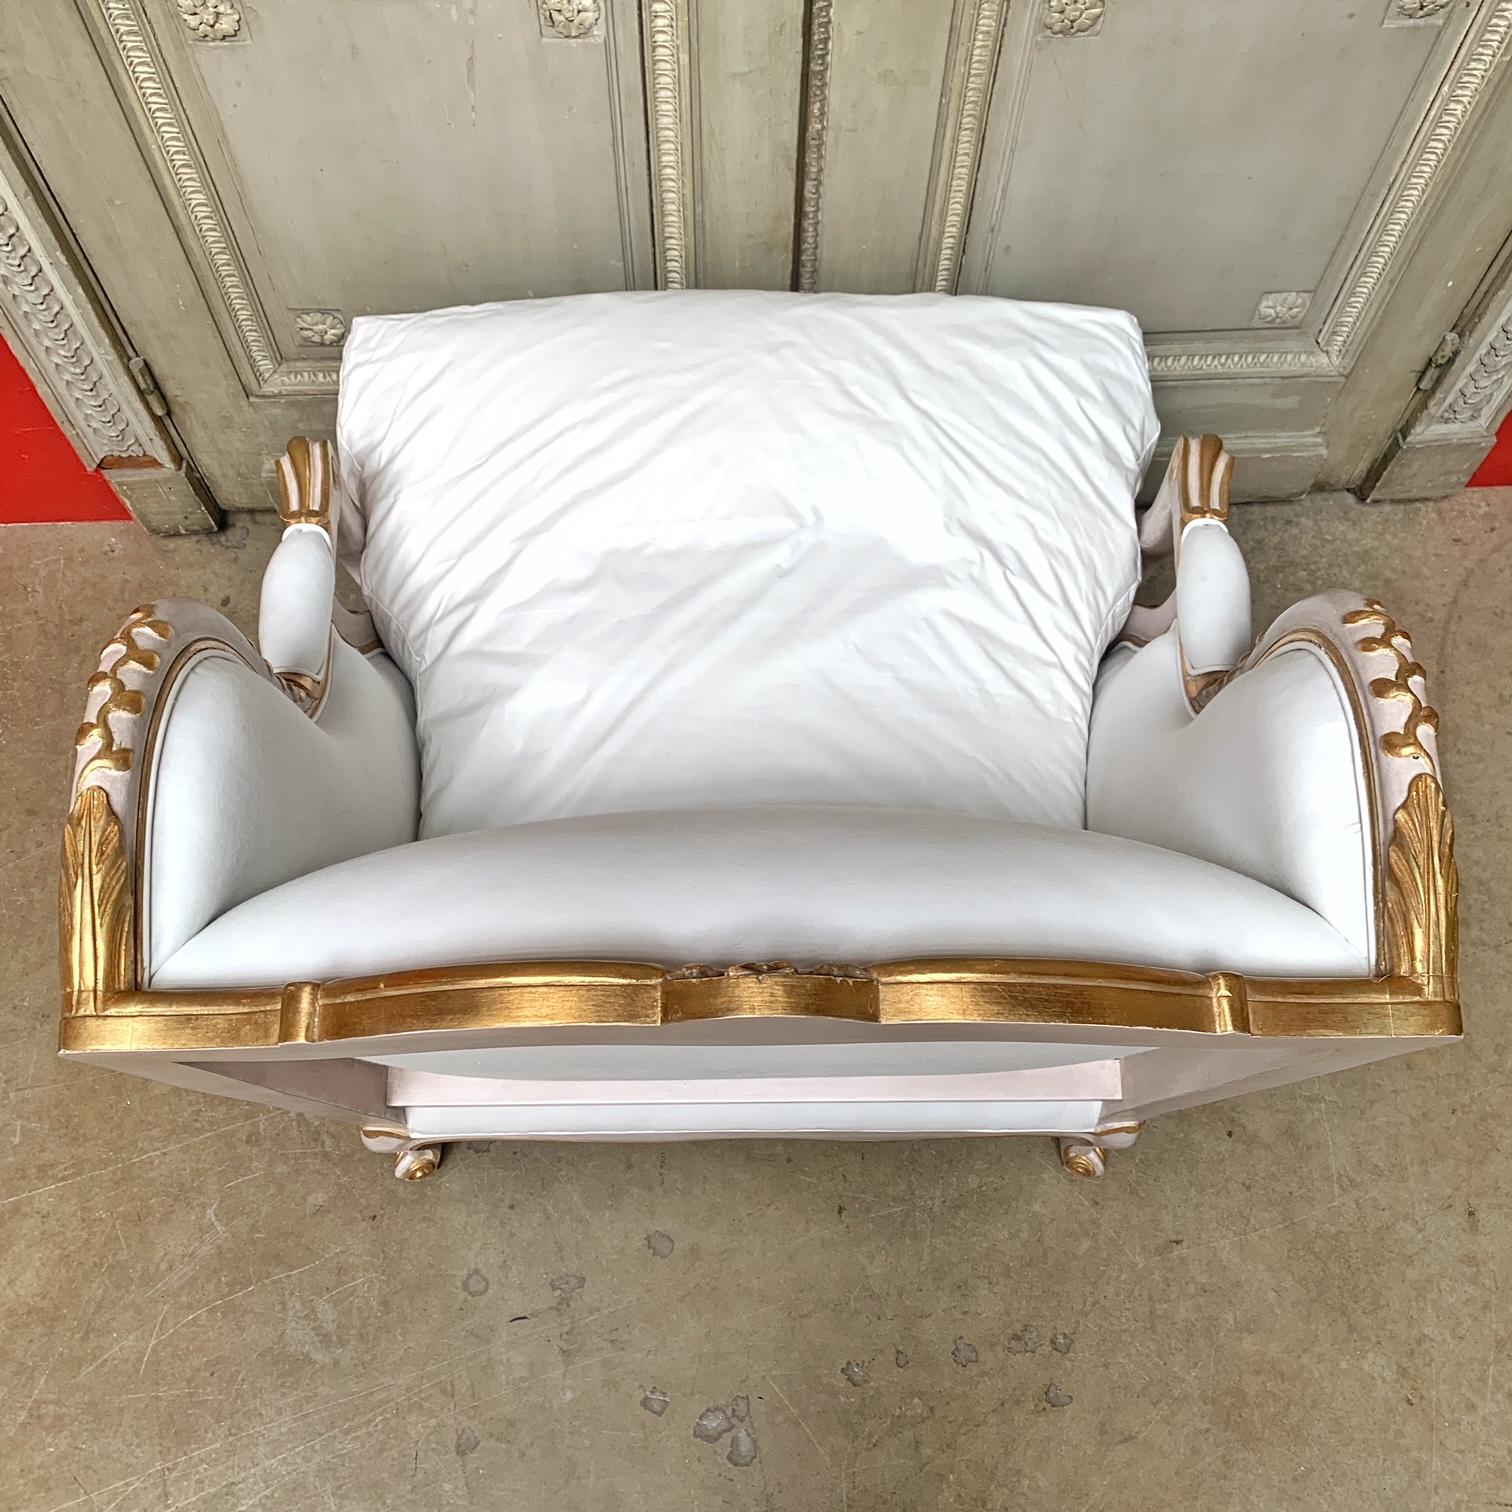 Pair of Large French Louis XV Style Bergeres with a Pink and Gilt Finish For Sale 2